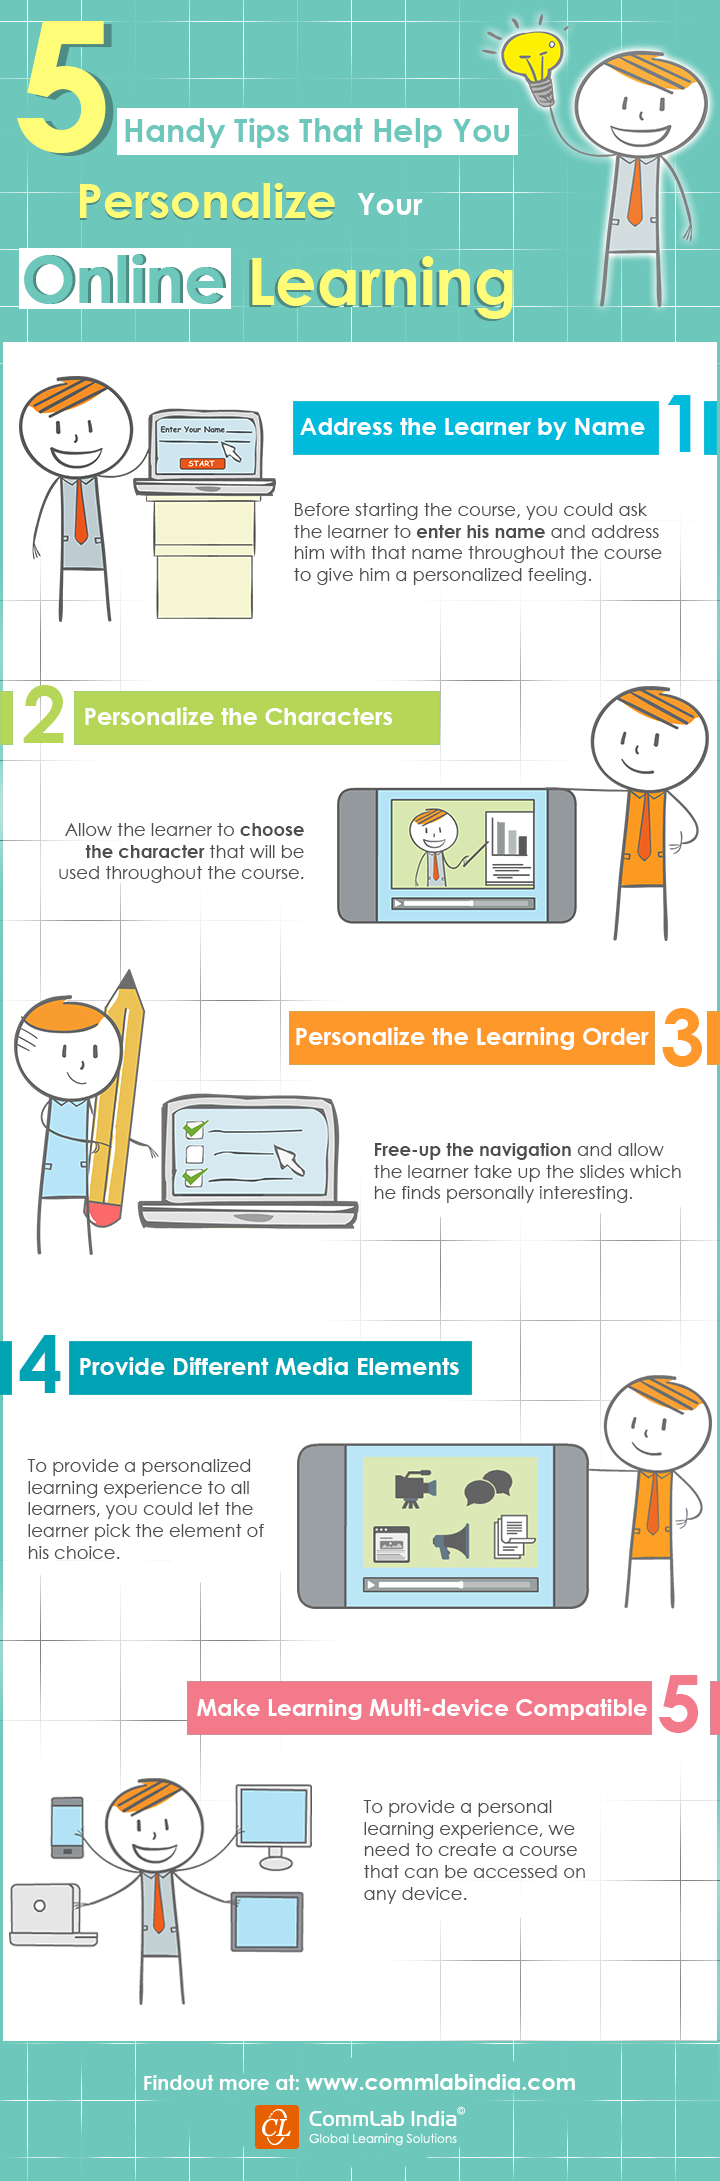 5 Handy Tips That Help You Personalize Your Online Learning [Infographic]